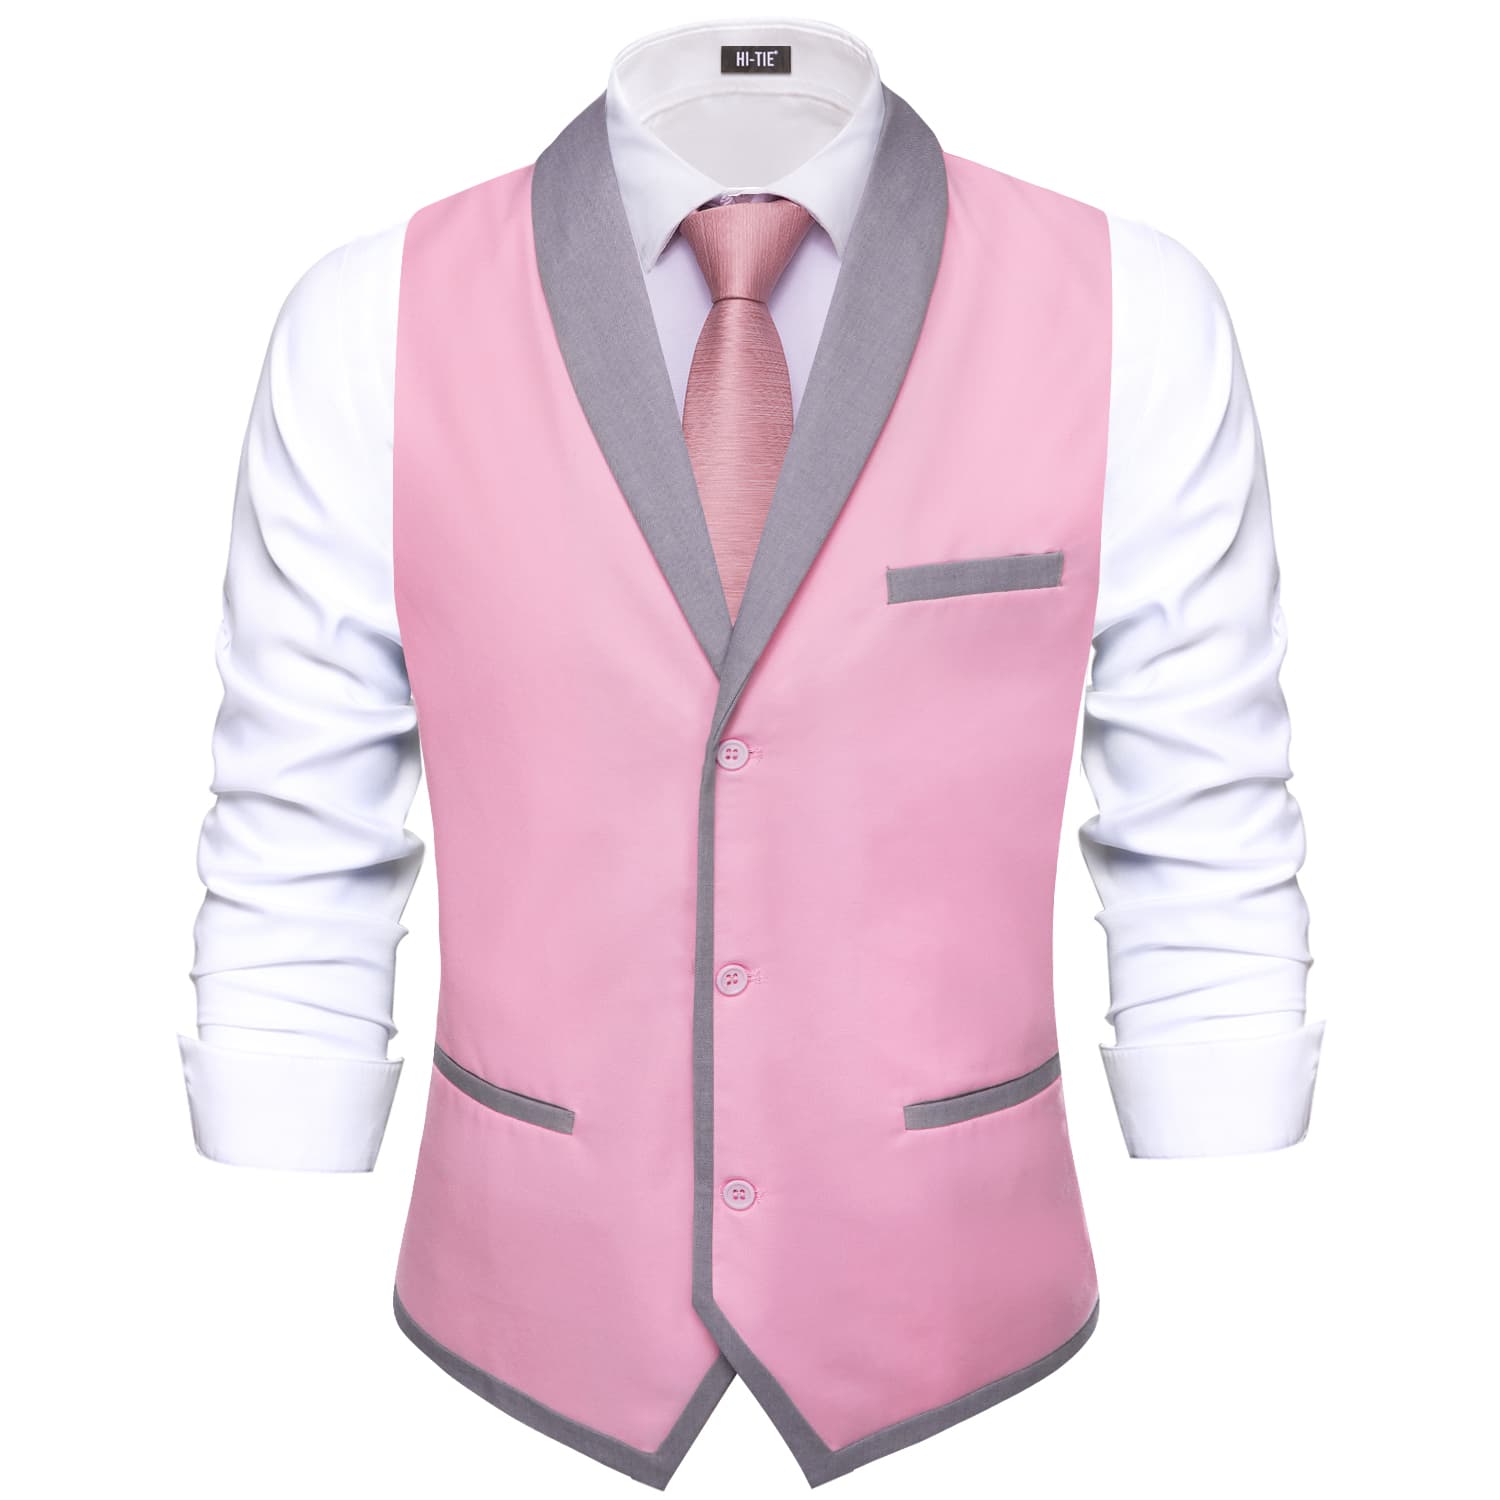 Grey Shawl Collar Pink Solid Waistcoat Formal Vests for Business